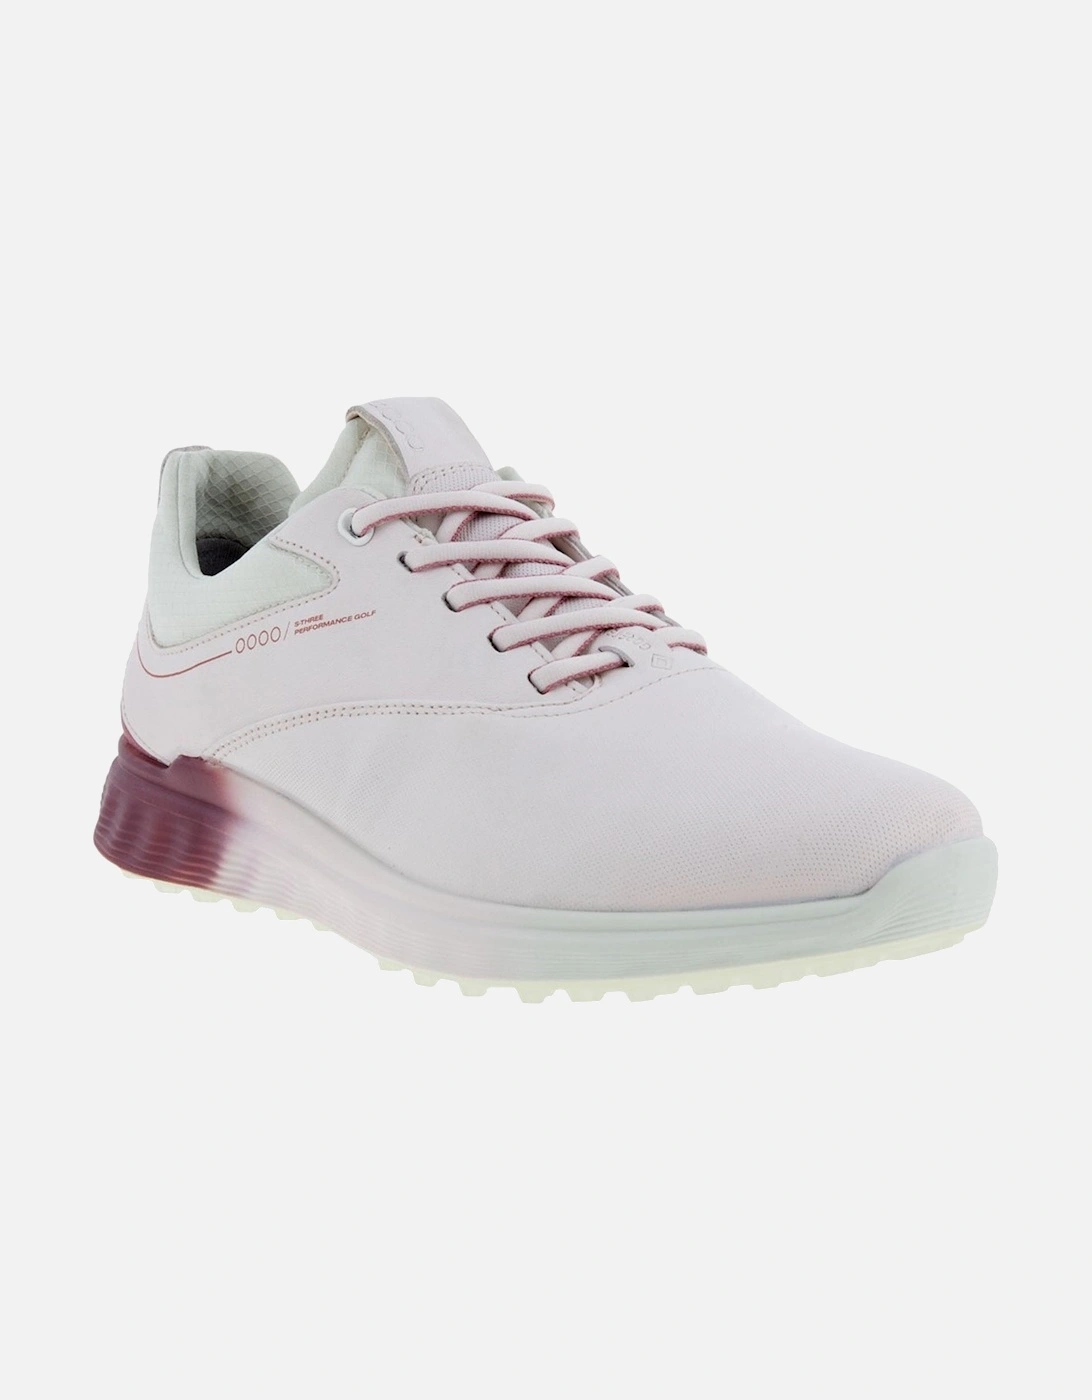 Womens S-Three Leather GORE-TEX Golf Shoes